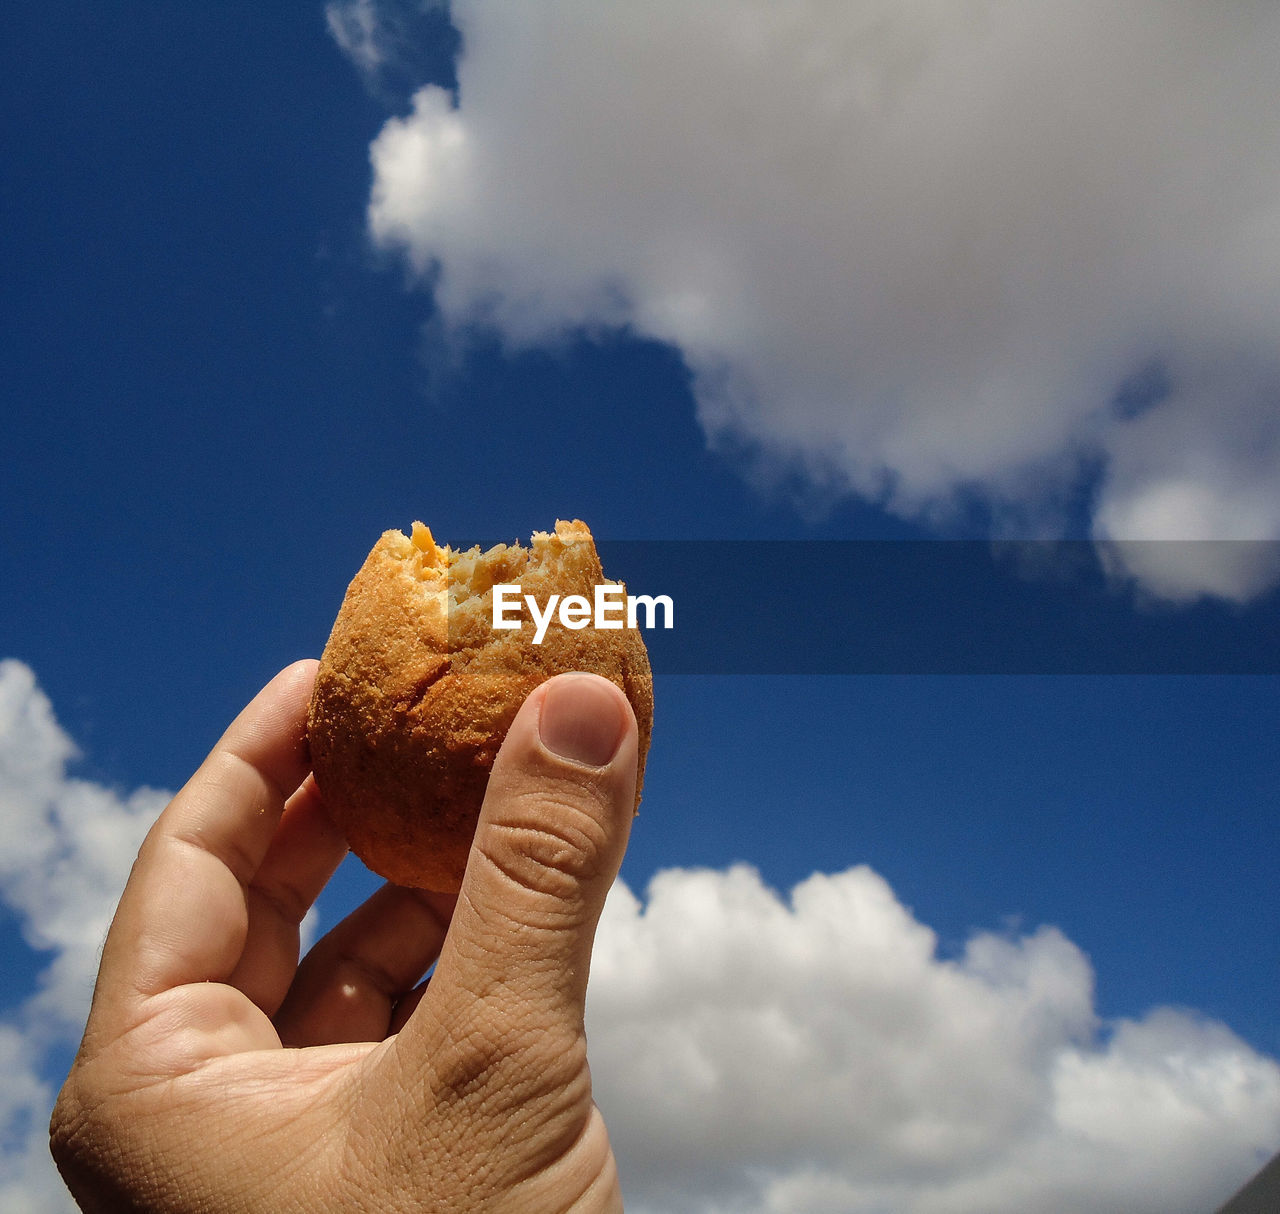 A hand holding a drumstick with sky in the background